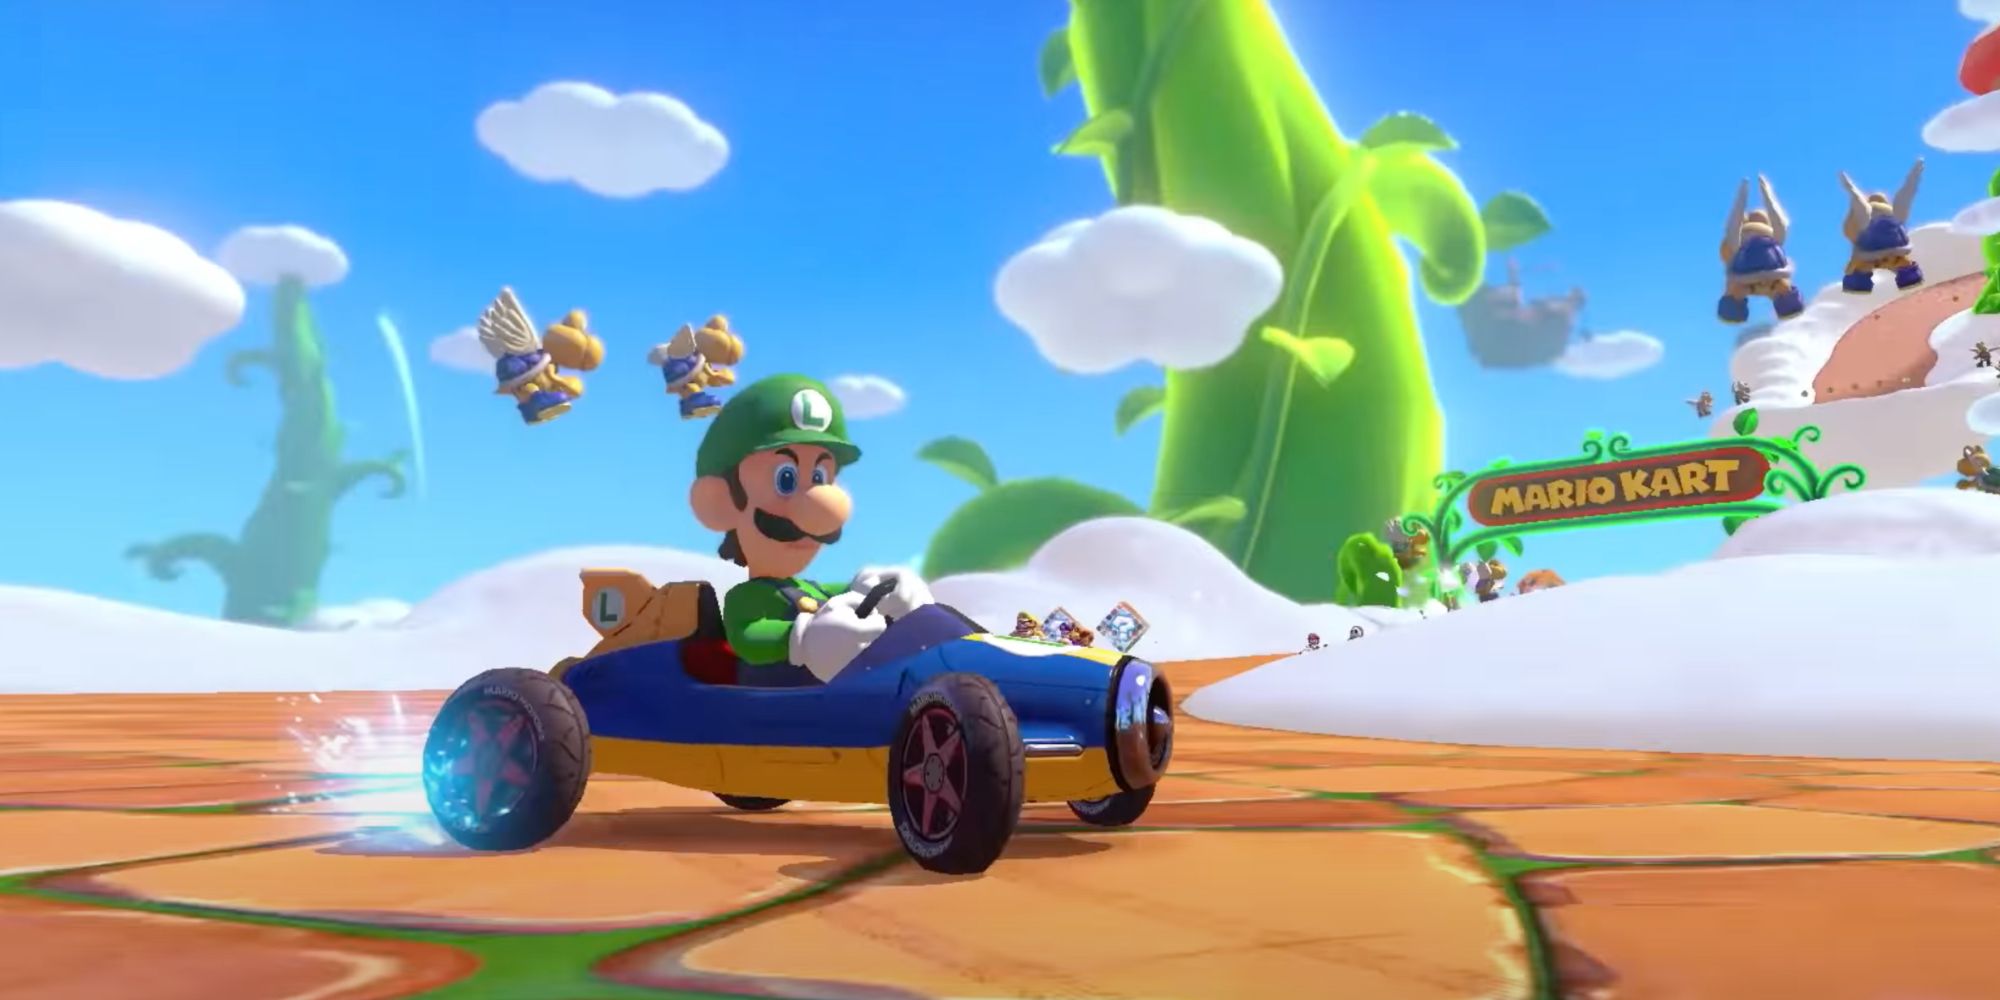 Every course included in Mario Kart 8 Deluxe's Booster Course Pass Wave 1 ranked from worst to best